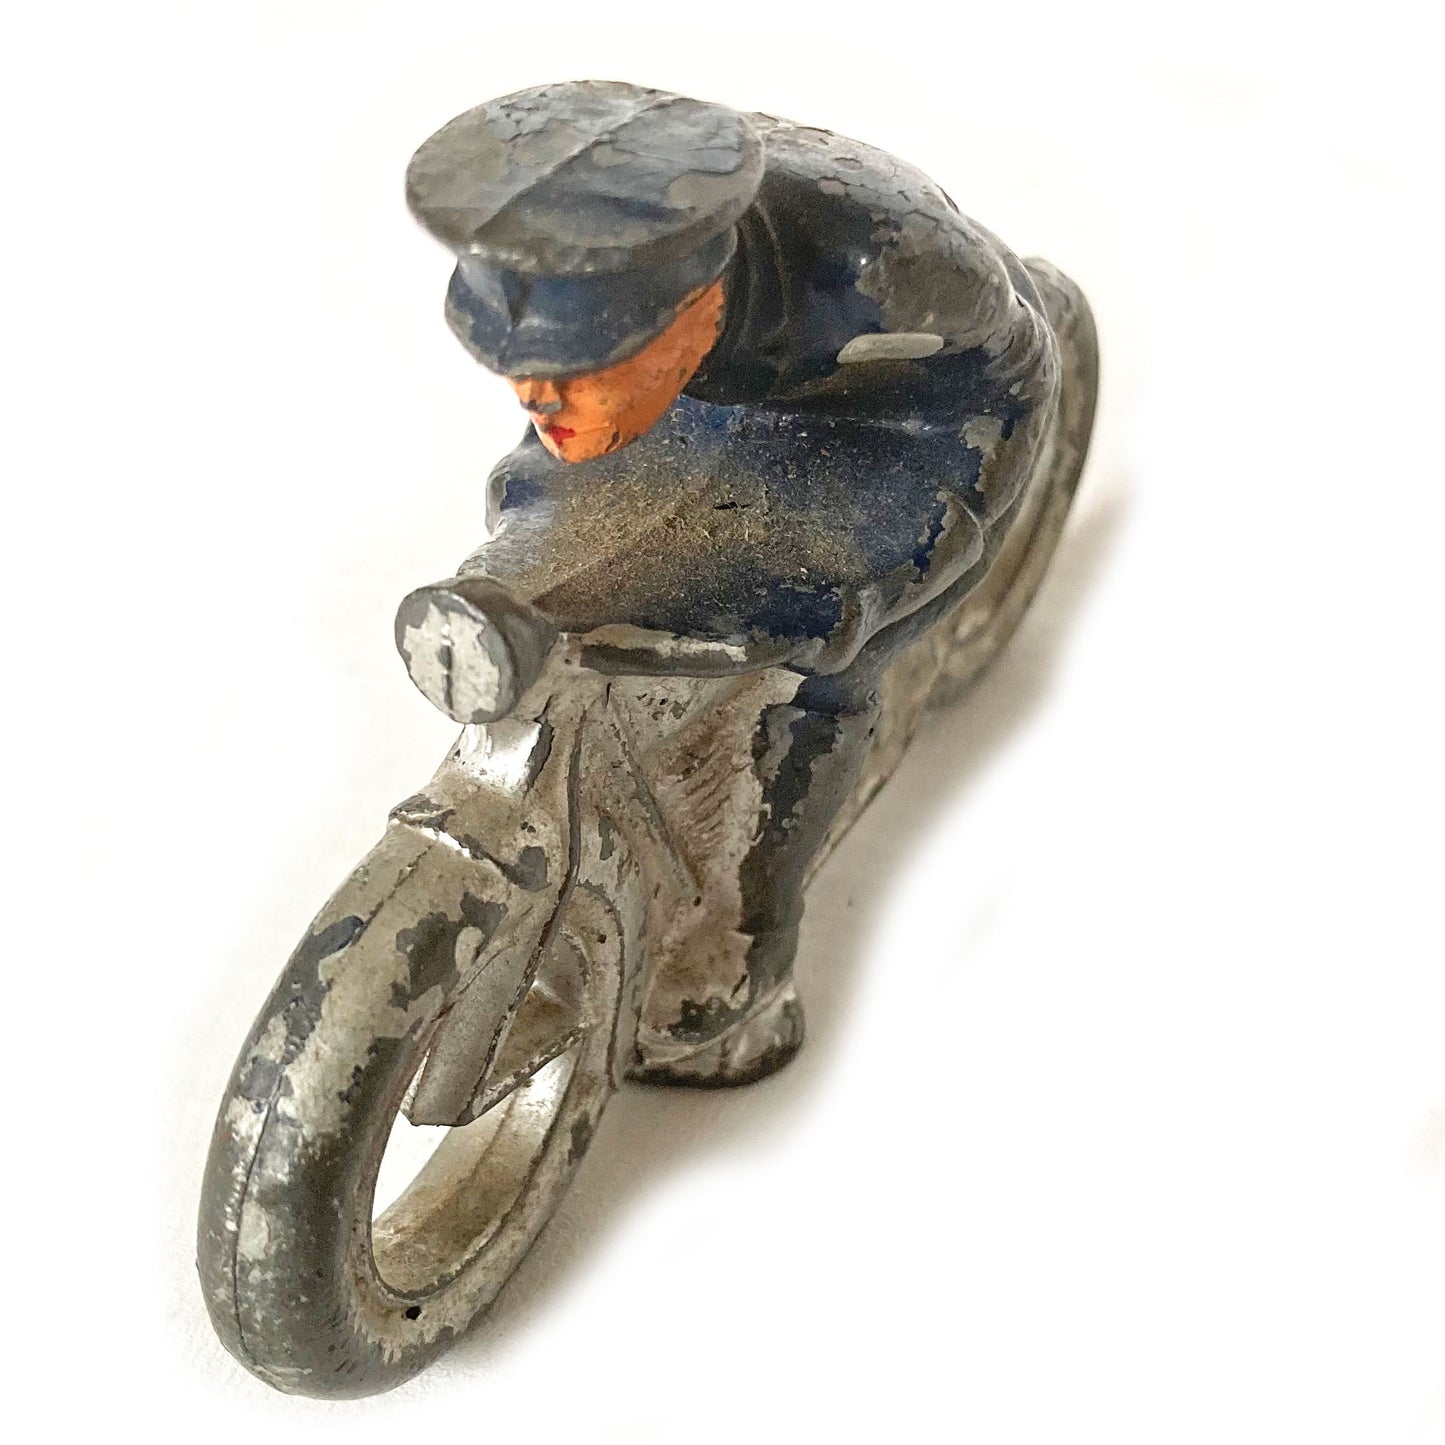 Hollow-cast Barclay lead motorcycle cop toy, Indian or Harley, 1930s-40s